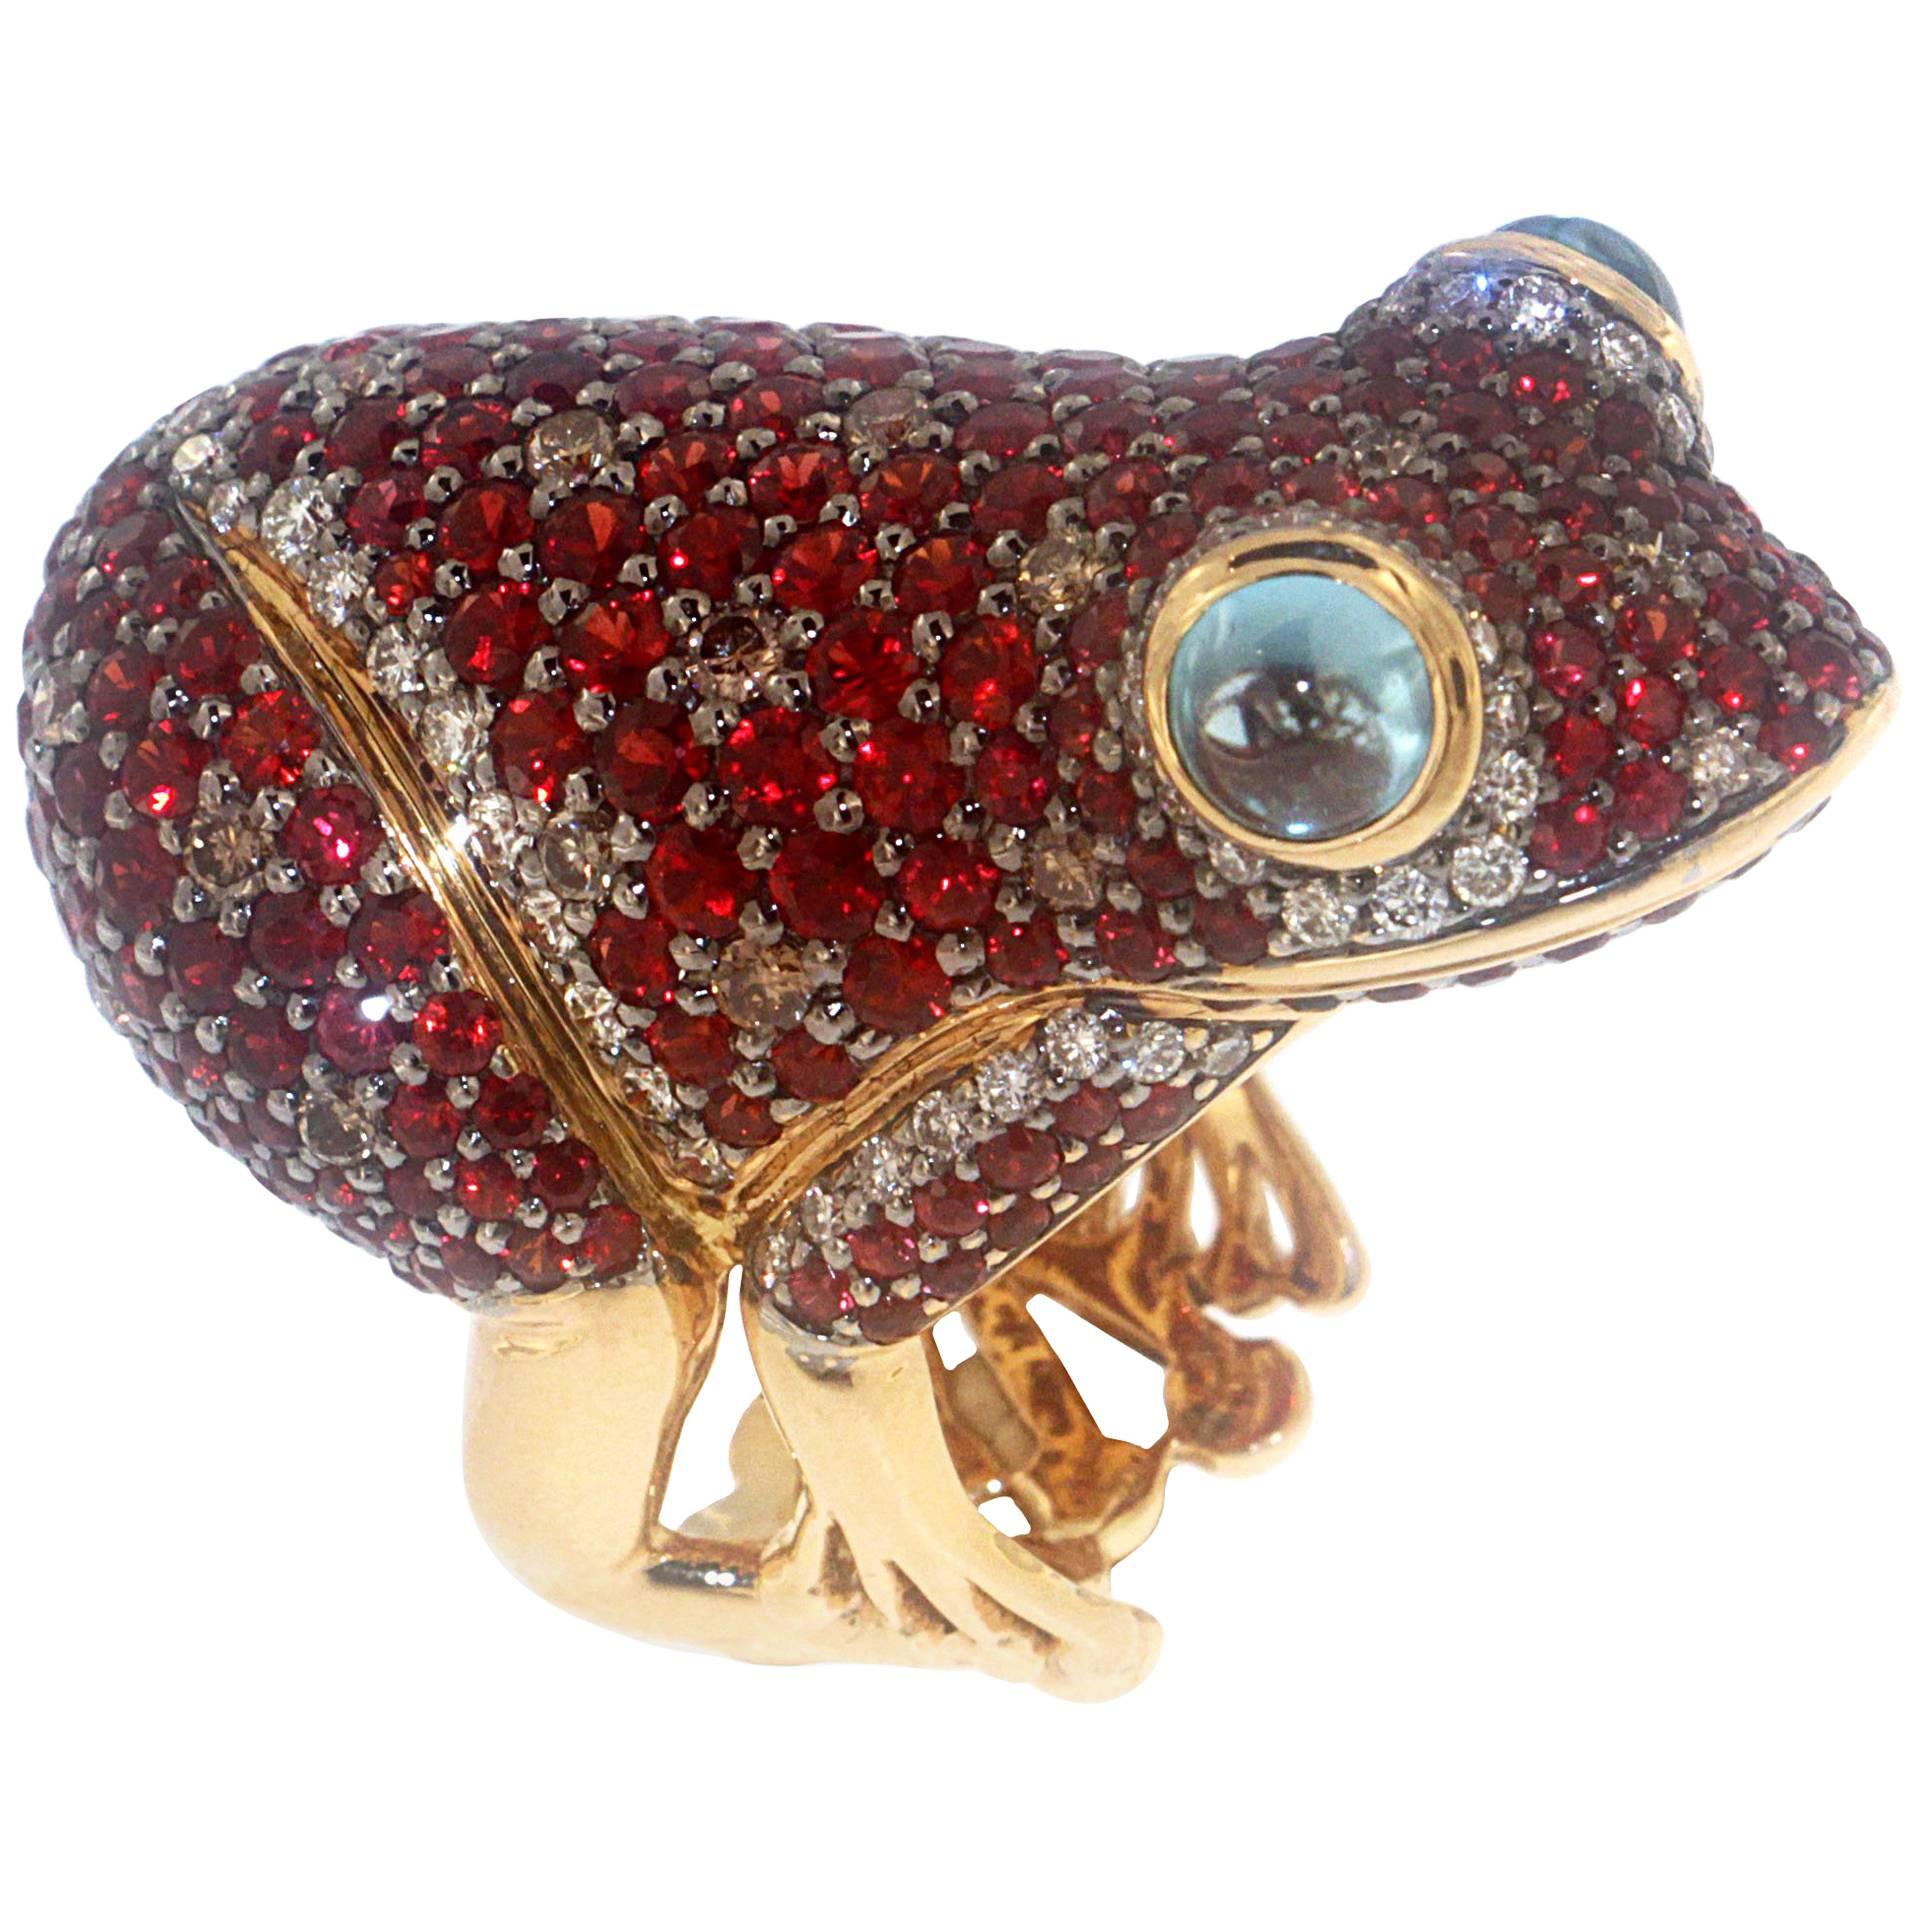 Zorab Creation Red Sapphire Brown and White Diamond Frog Ring